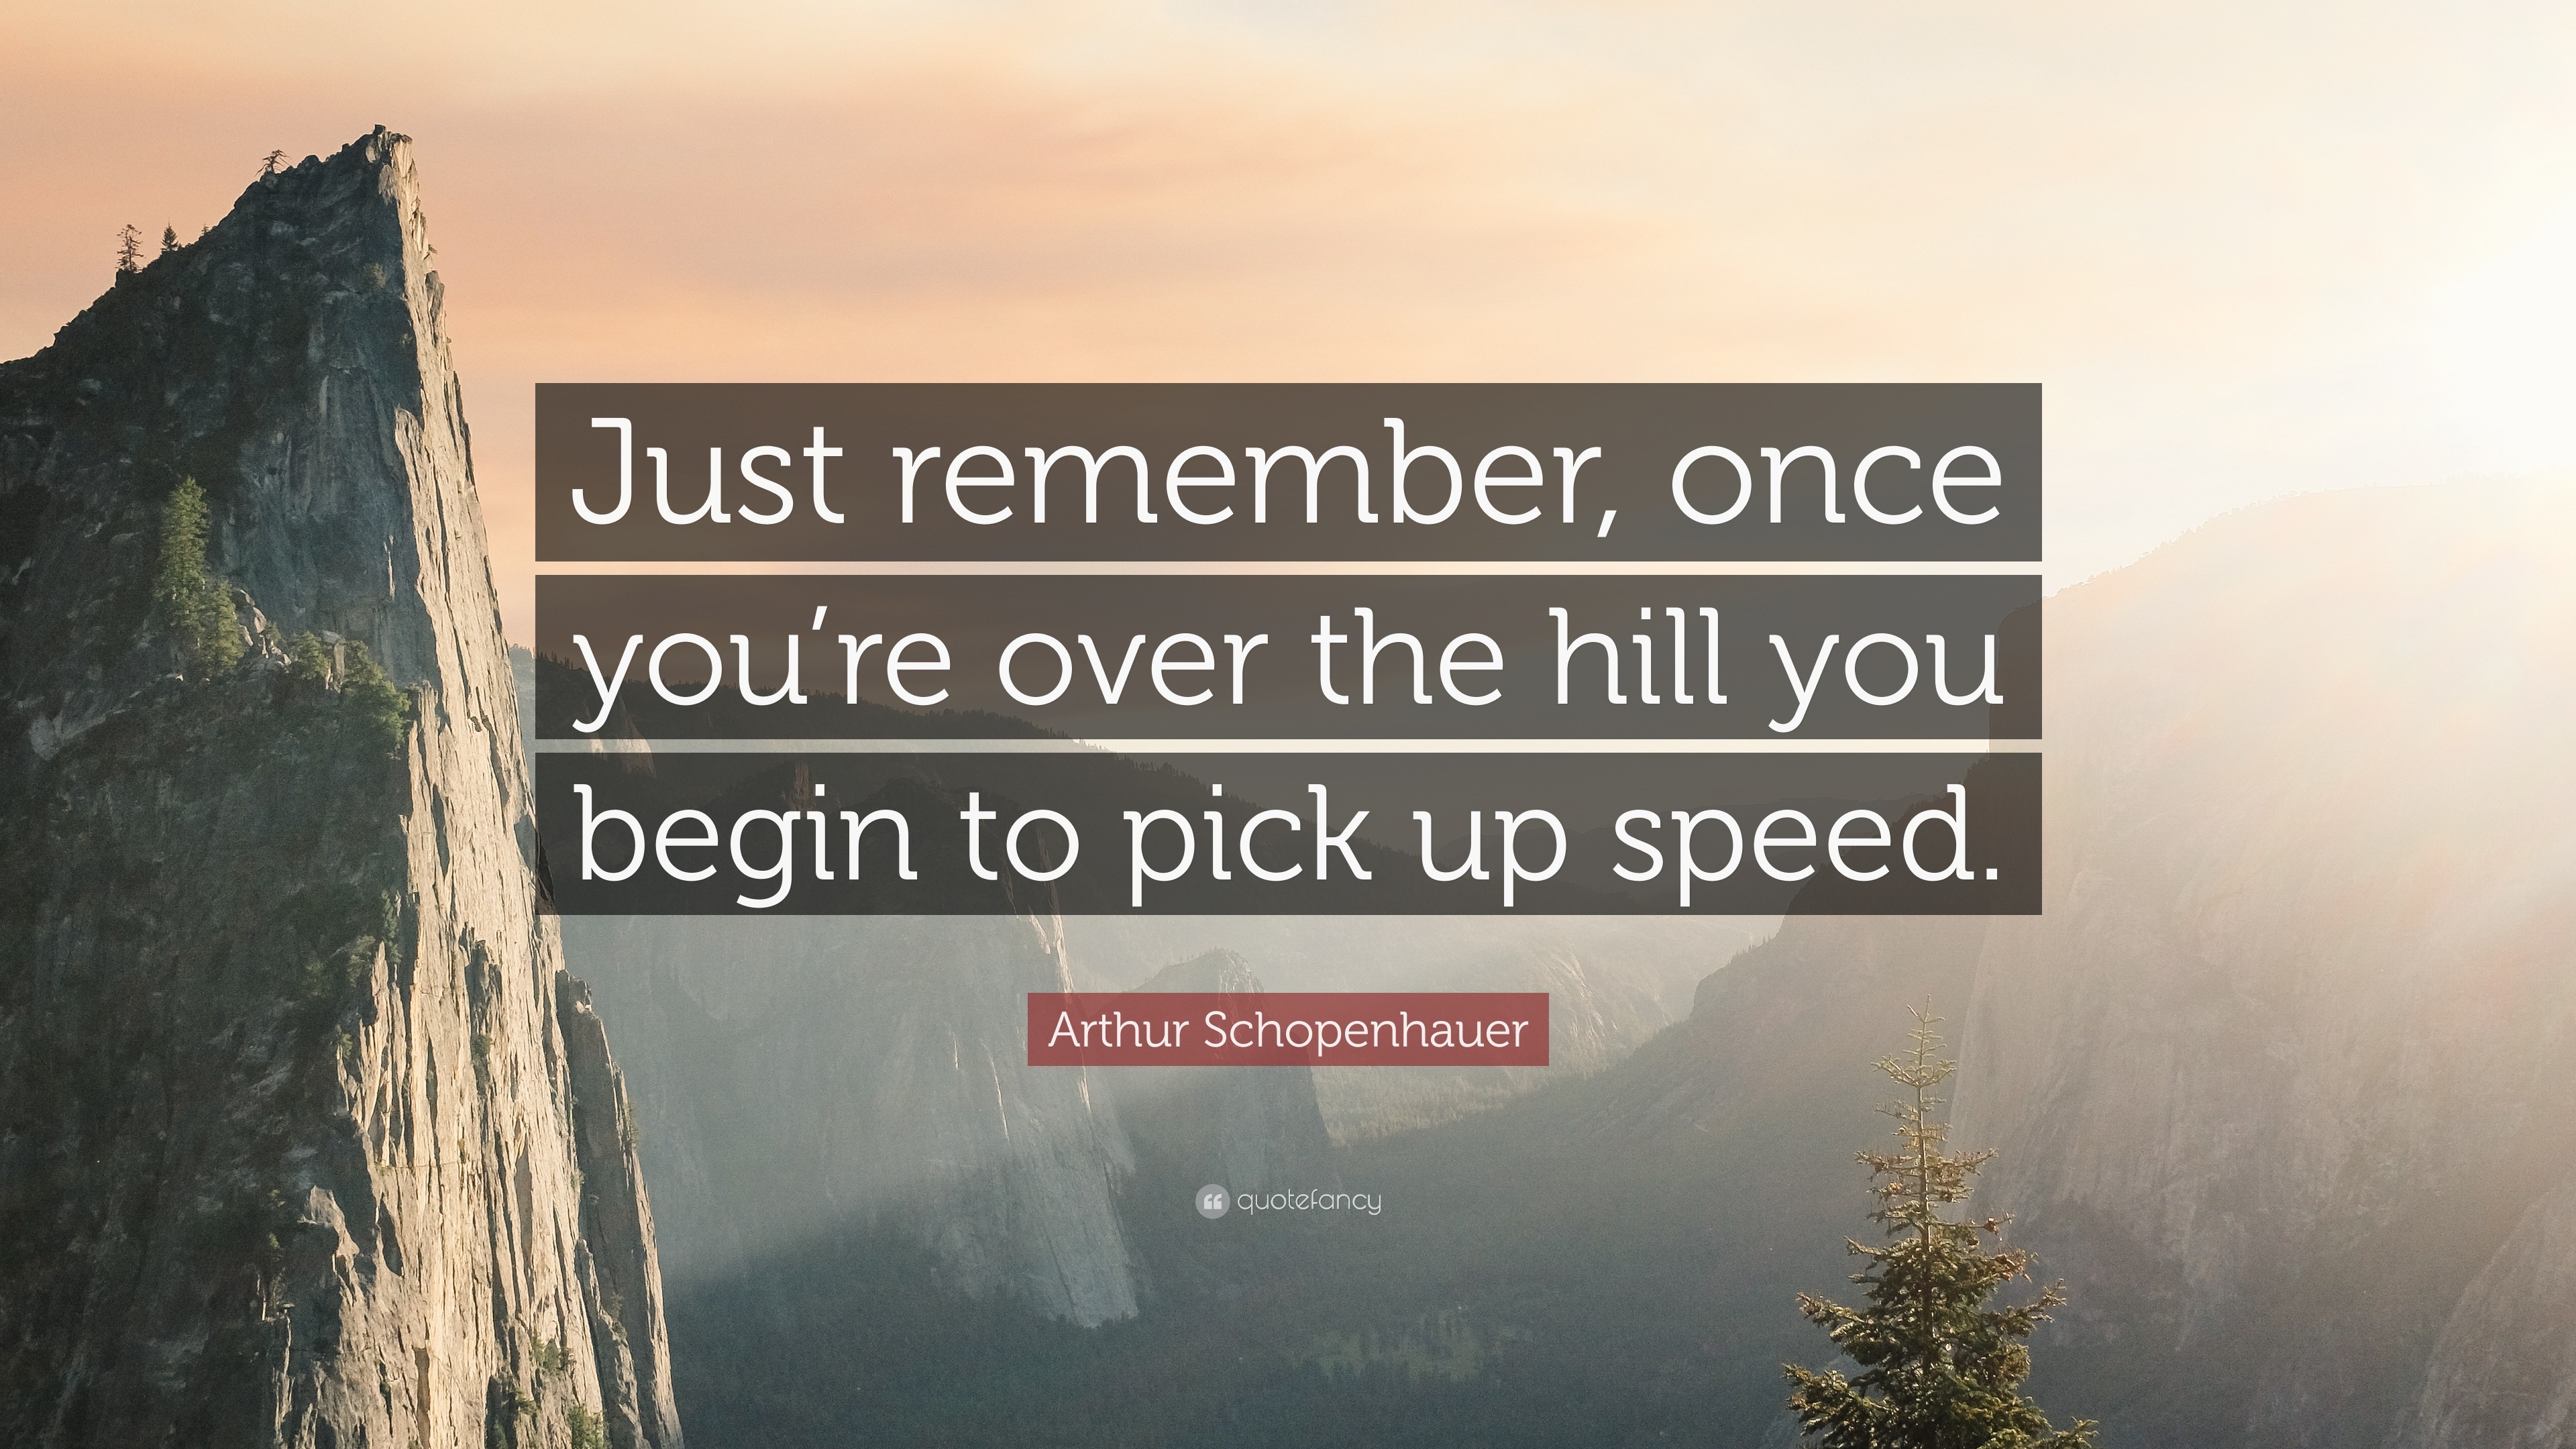 Arthur Schopenhauer Quote: “Just remember, once you're over the hill you  begin to pick up